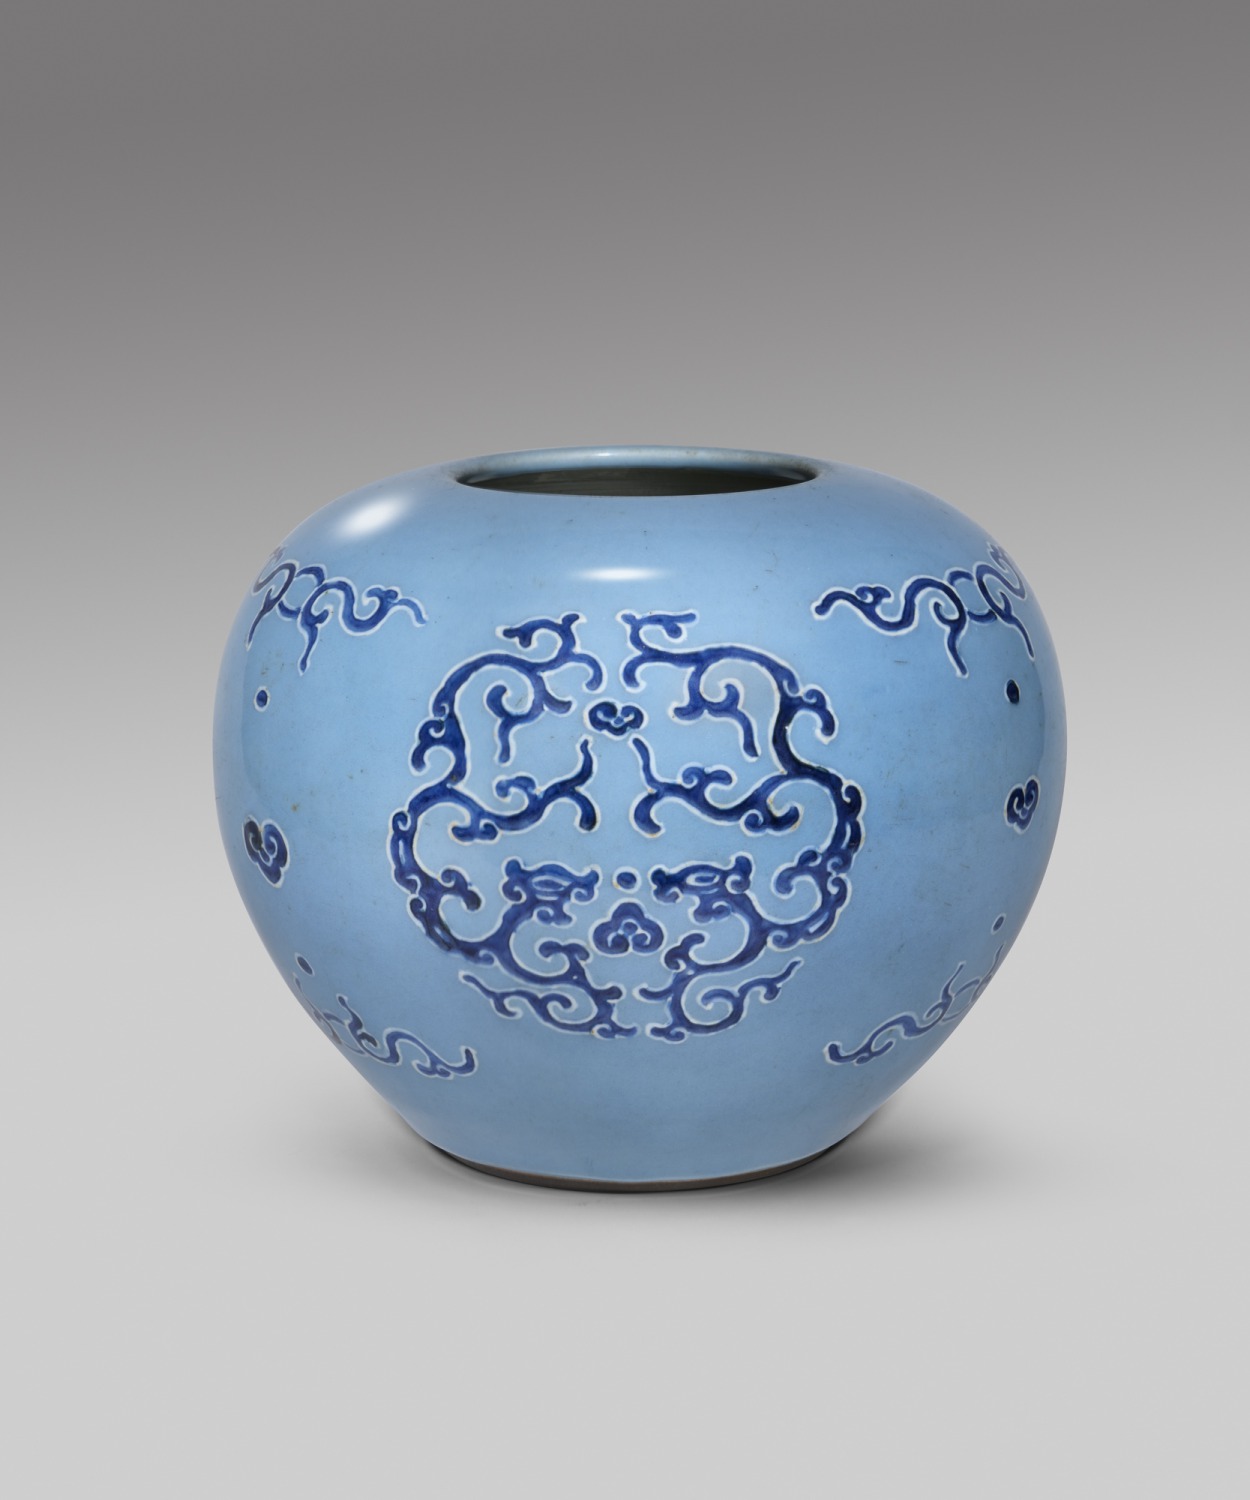 Chinese Ceramics and Works of Art - Asian Art in London 2022 (6)